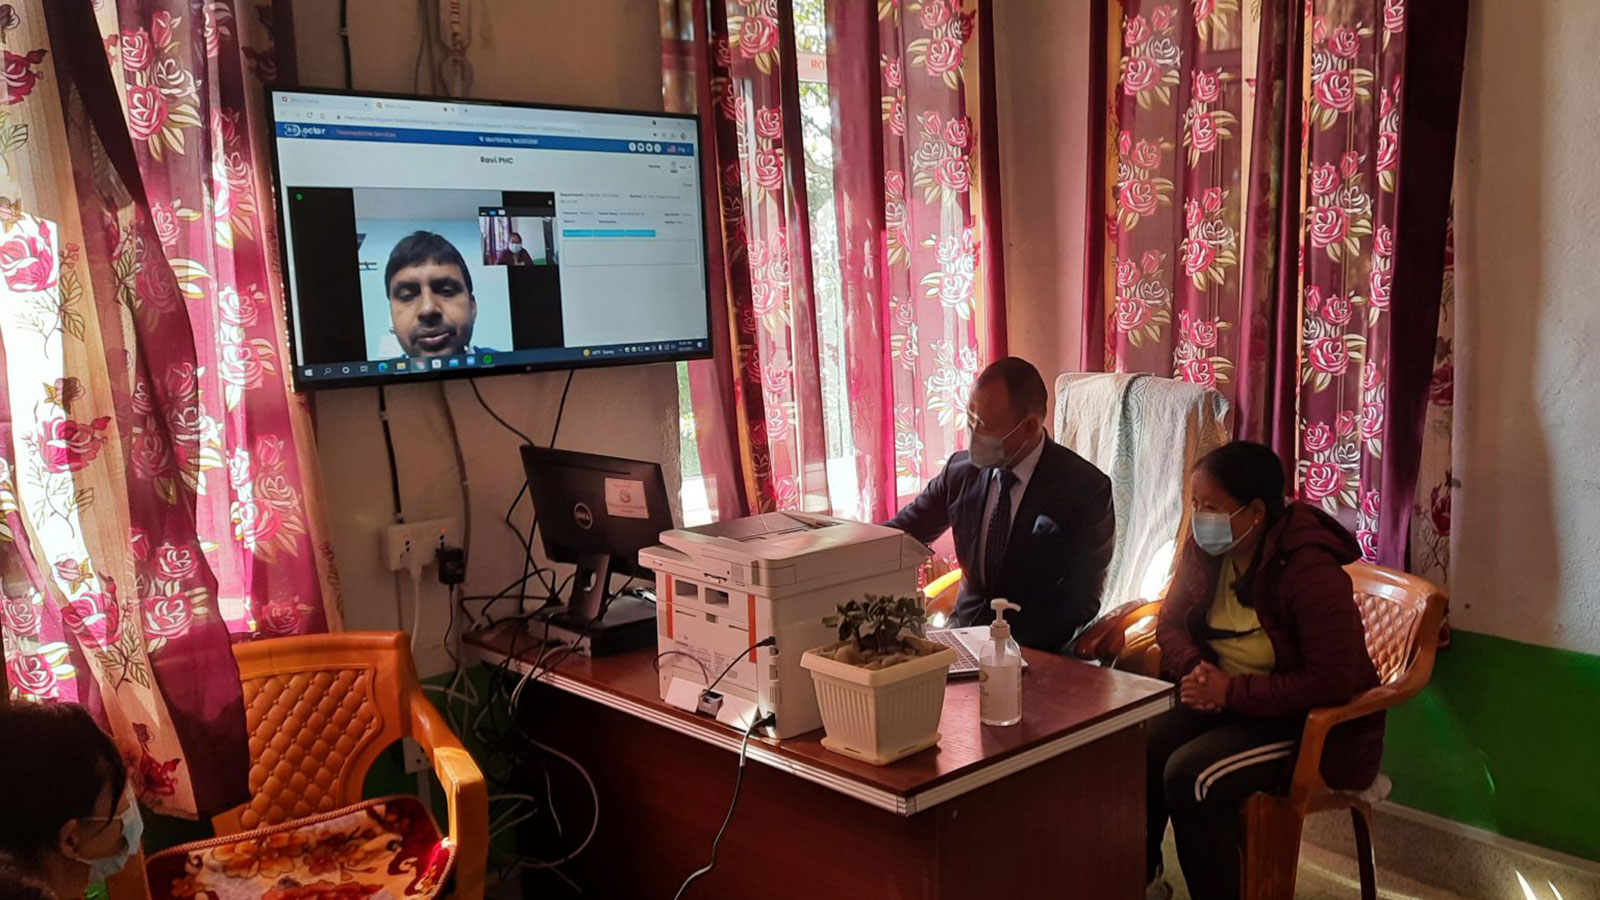 PV-powered Primary Health Centers (PHCs) linked with urban hospitals using Telemedicine: A local patient consulting an expert doctor by using the telemedicine facility, at the Rabi PHC, Miklajung, Panchthar. Copyright: GIZ/REEEP